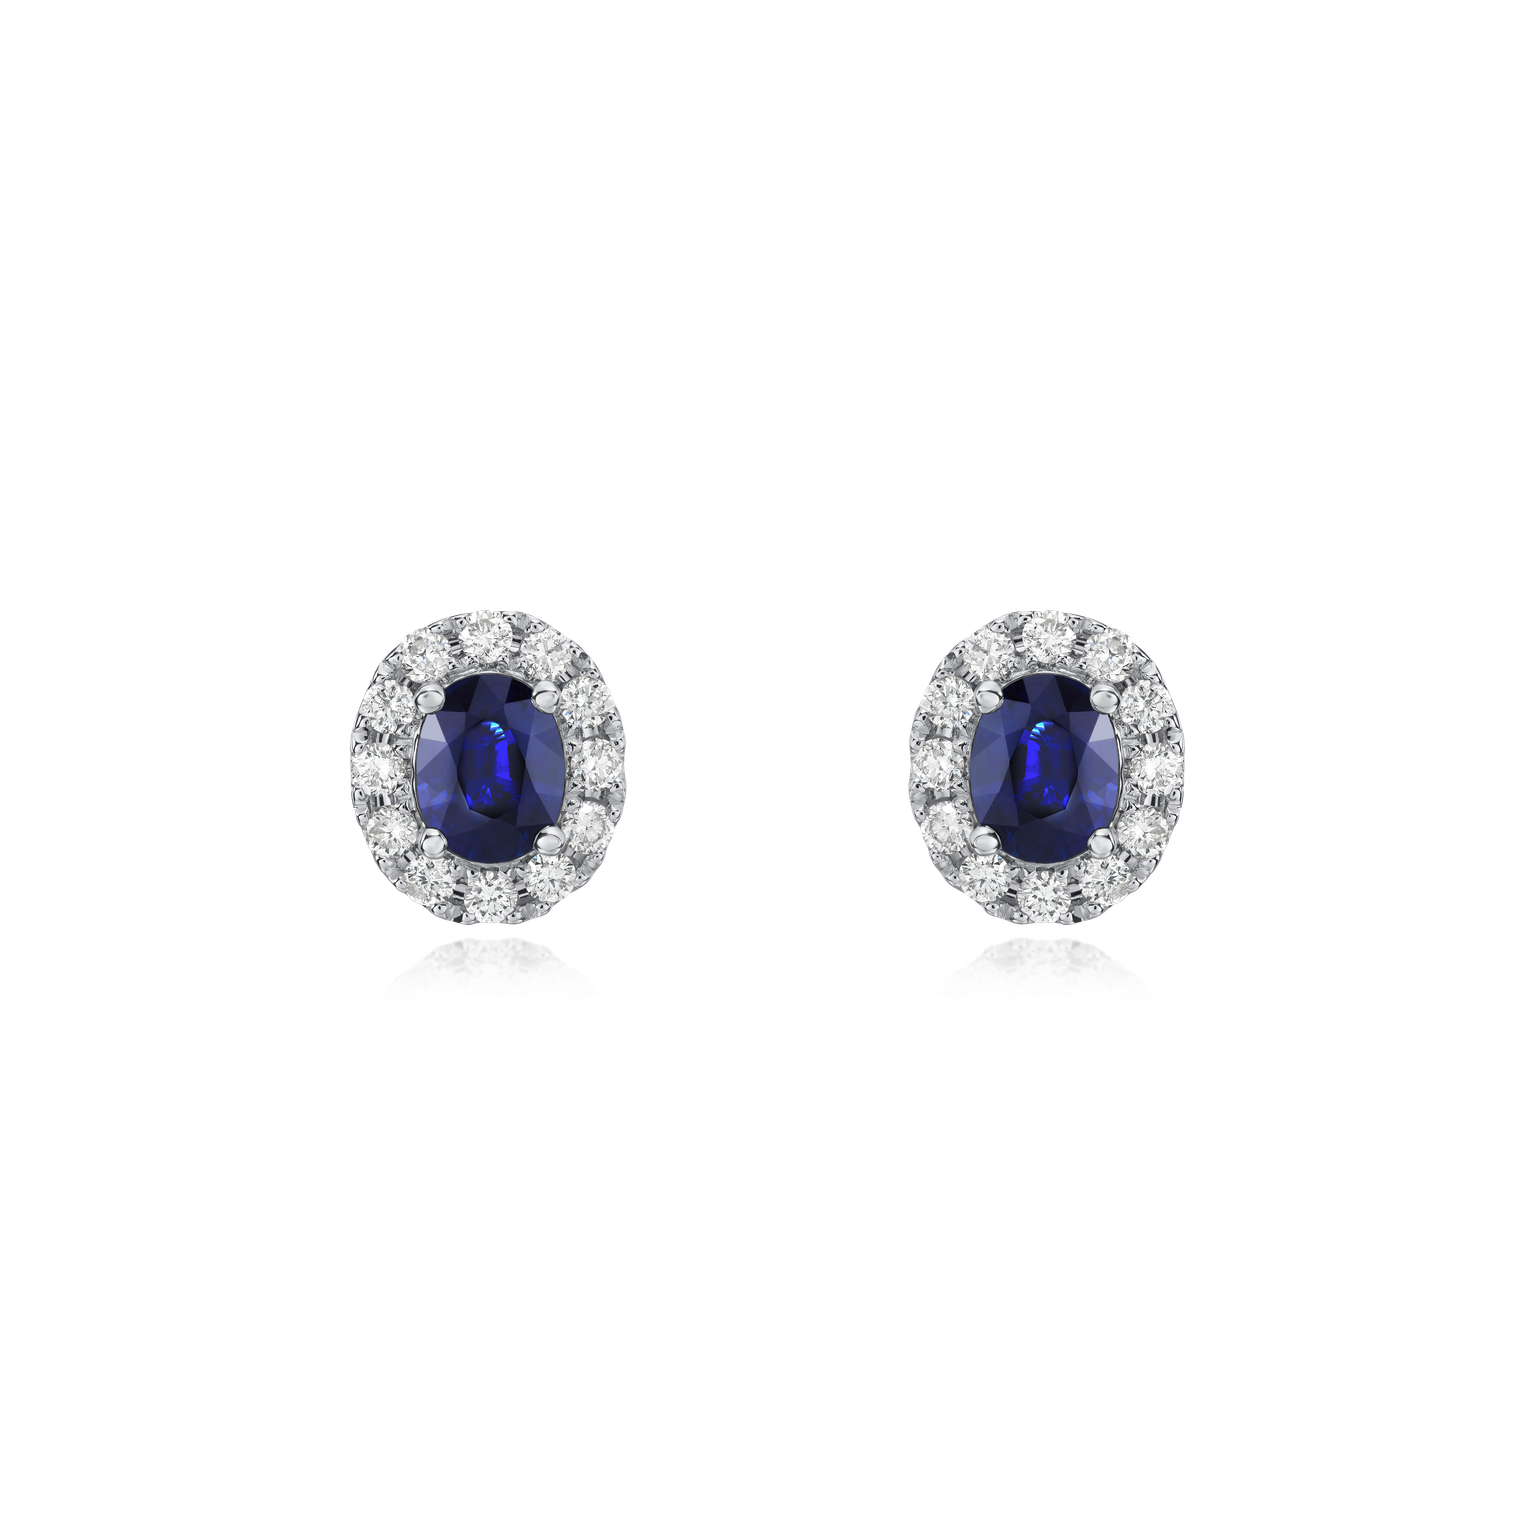 0.91cts Sapphire and Diamond Cluster Earrings